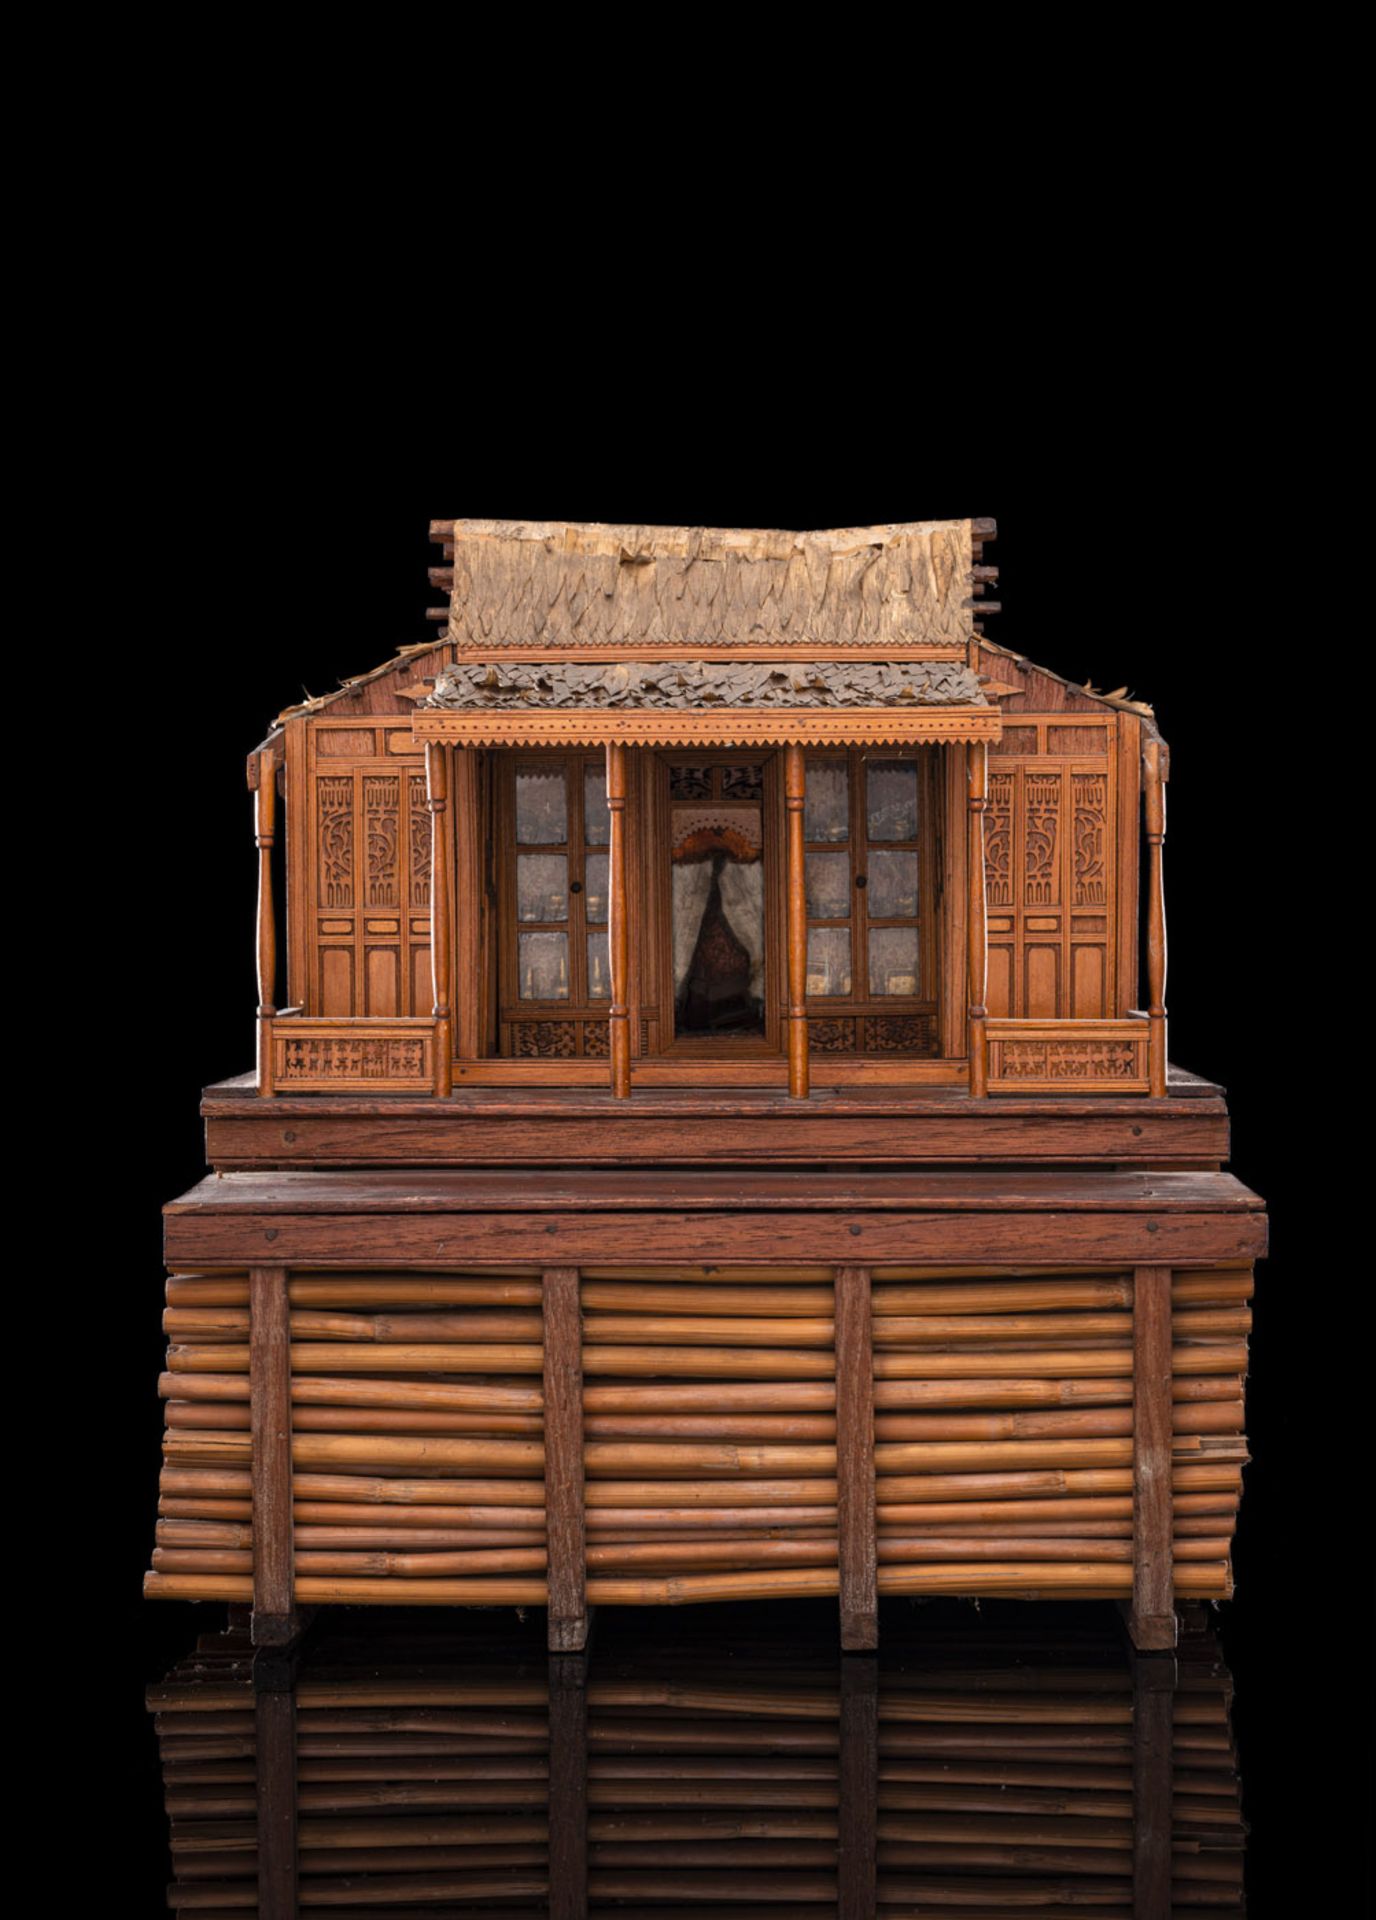 A SCALE WOOD AND BAMBOO MODEL OF A TRADITIONAL ANTIQUES SHOP